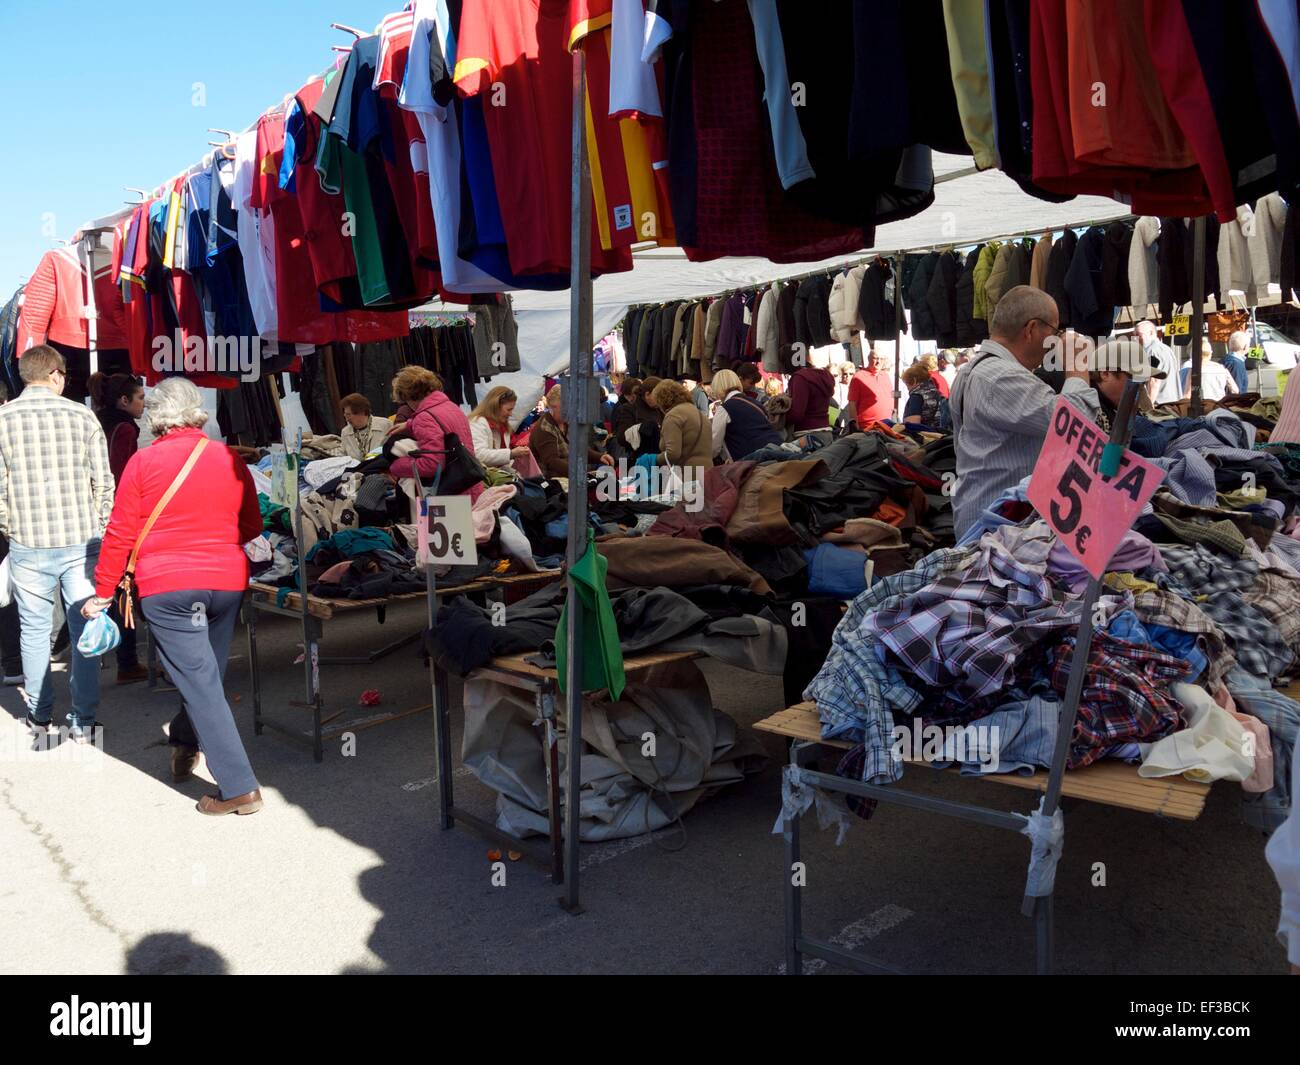 Clothes store at a market in Spain Stock Photo - Alamy